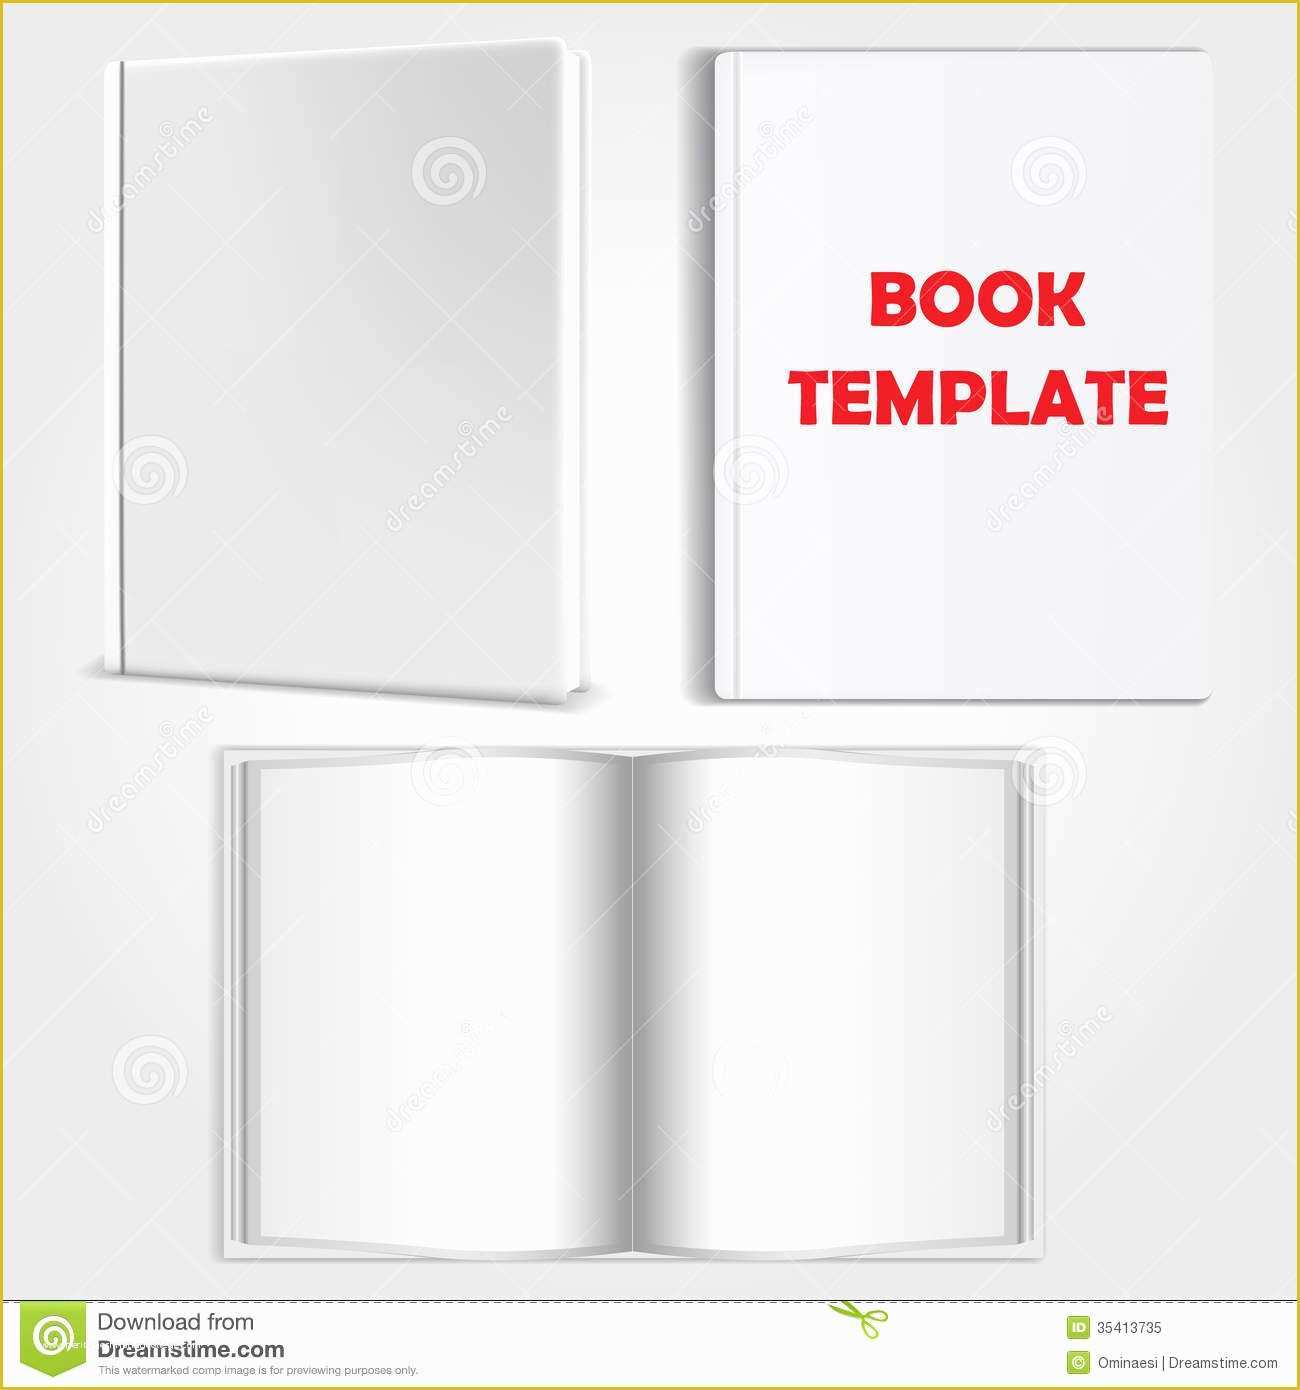 Free Photobook Template Of Book Template Vector Royalty Free Stock Image